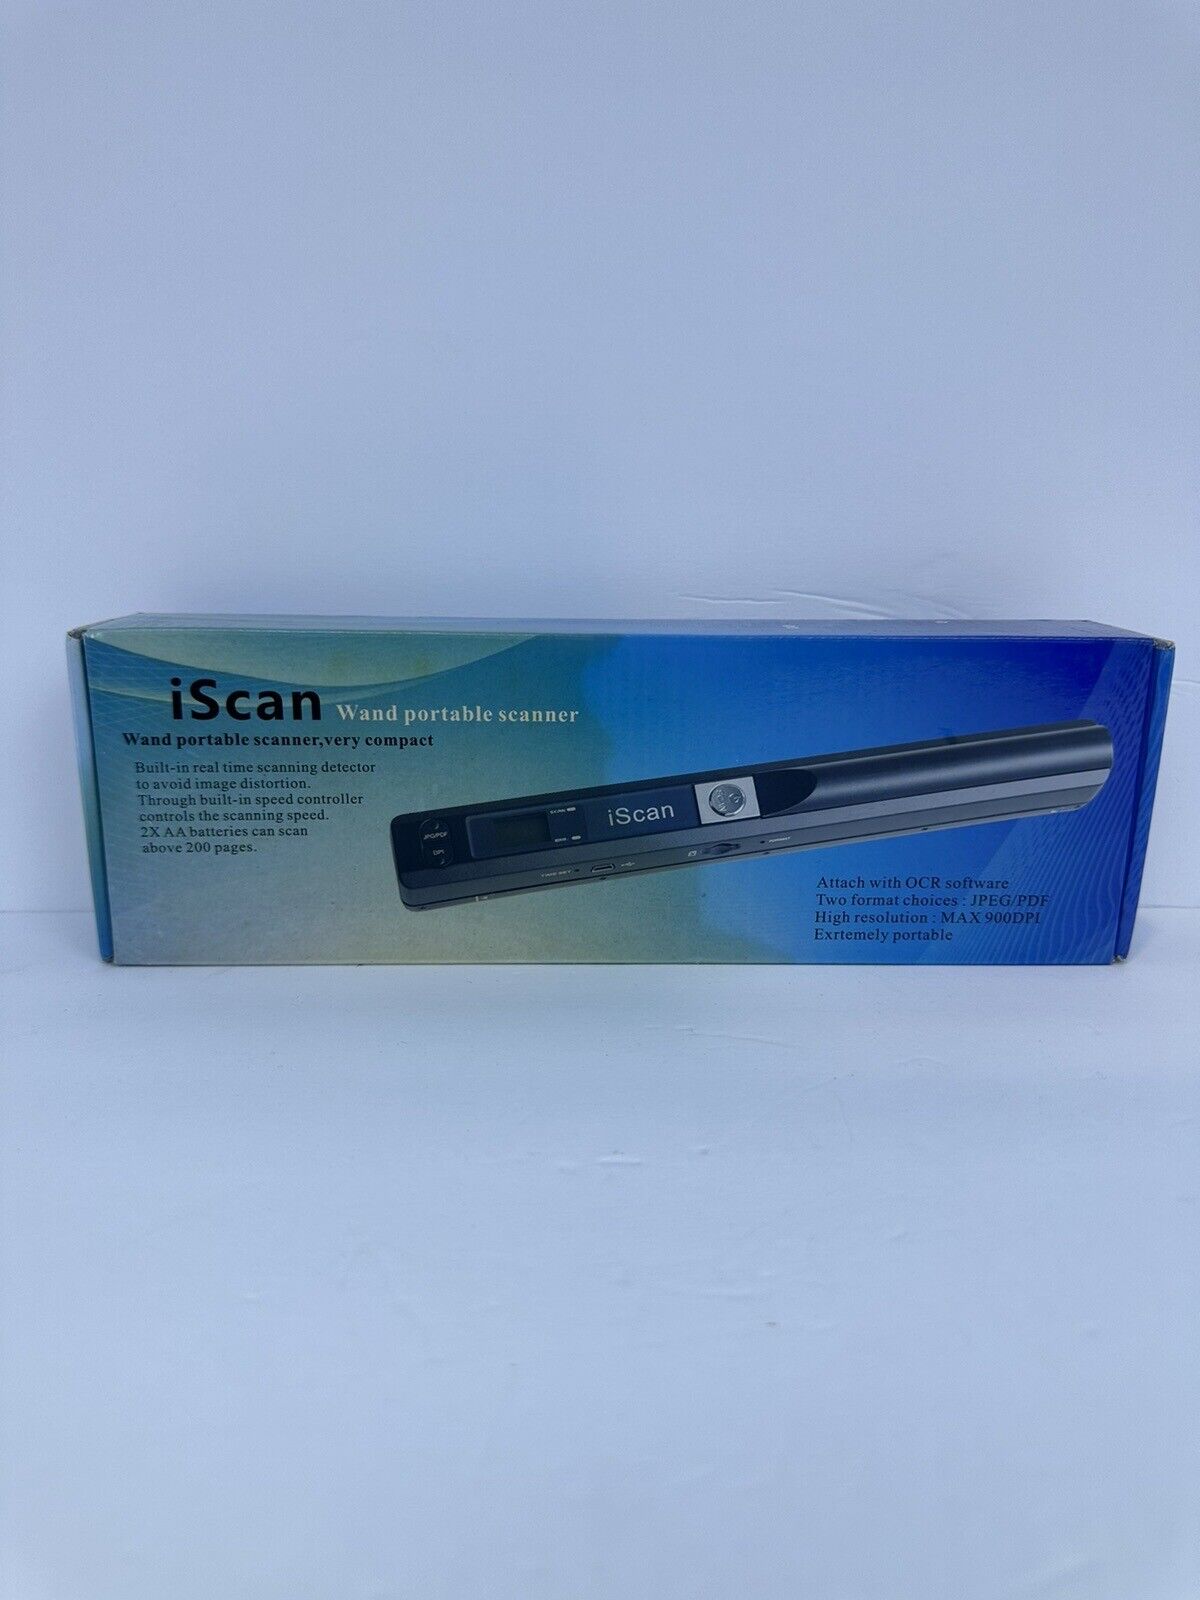 iScan 900DPI Cordless Wand Portable Scanner Handheld, Compact - Red